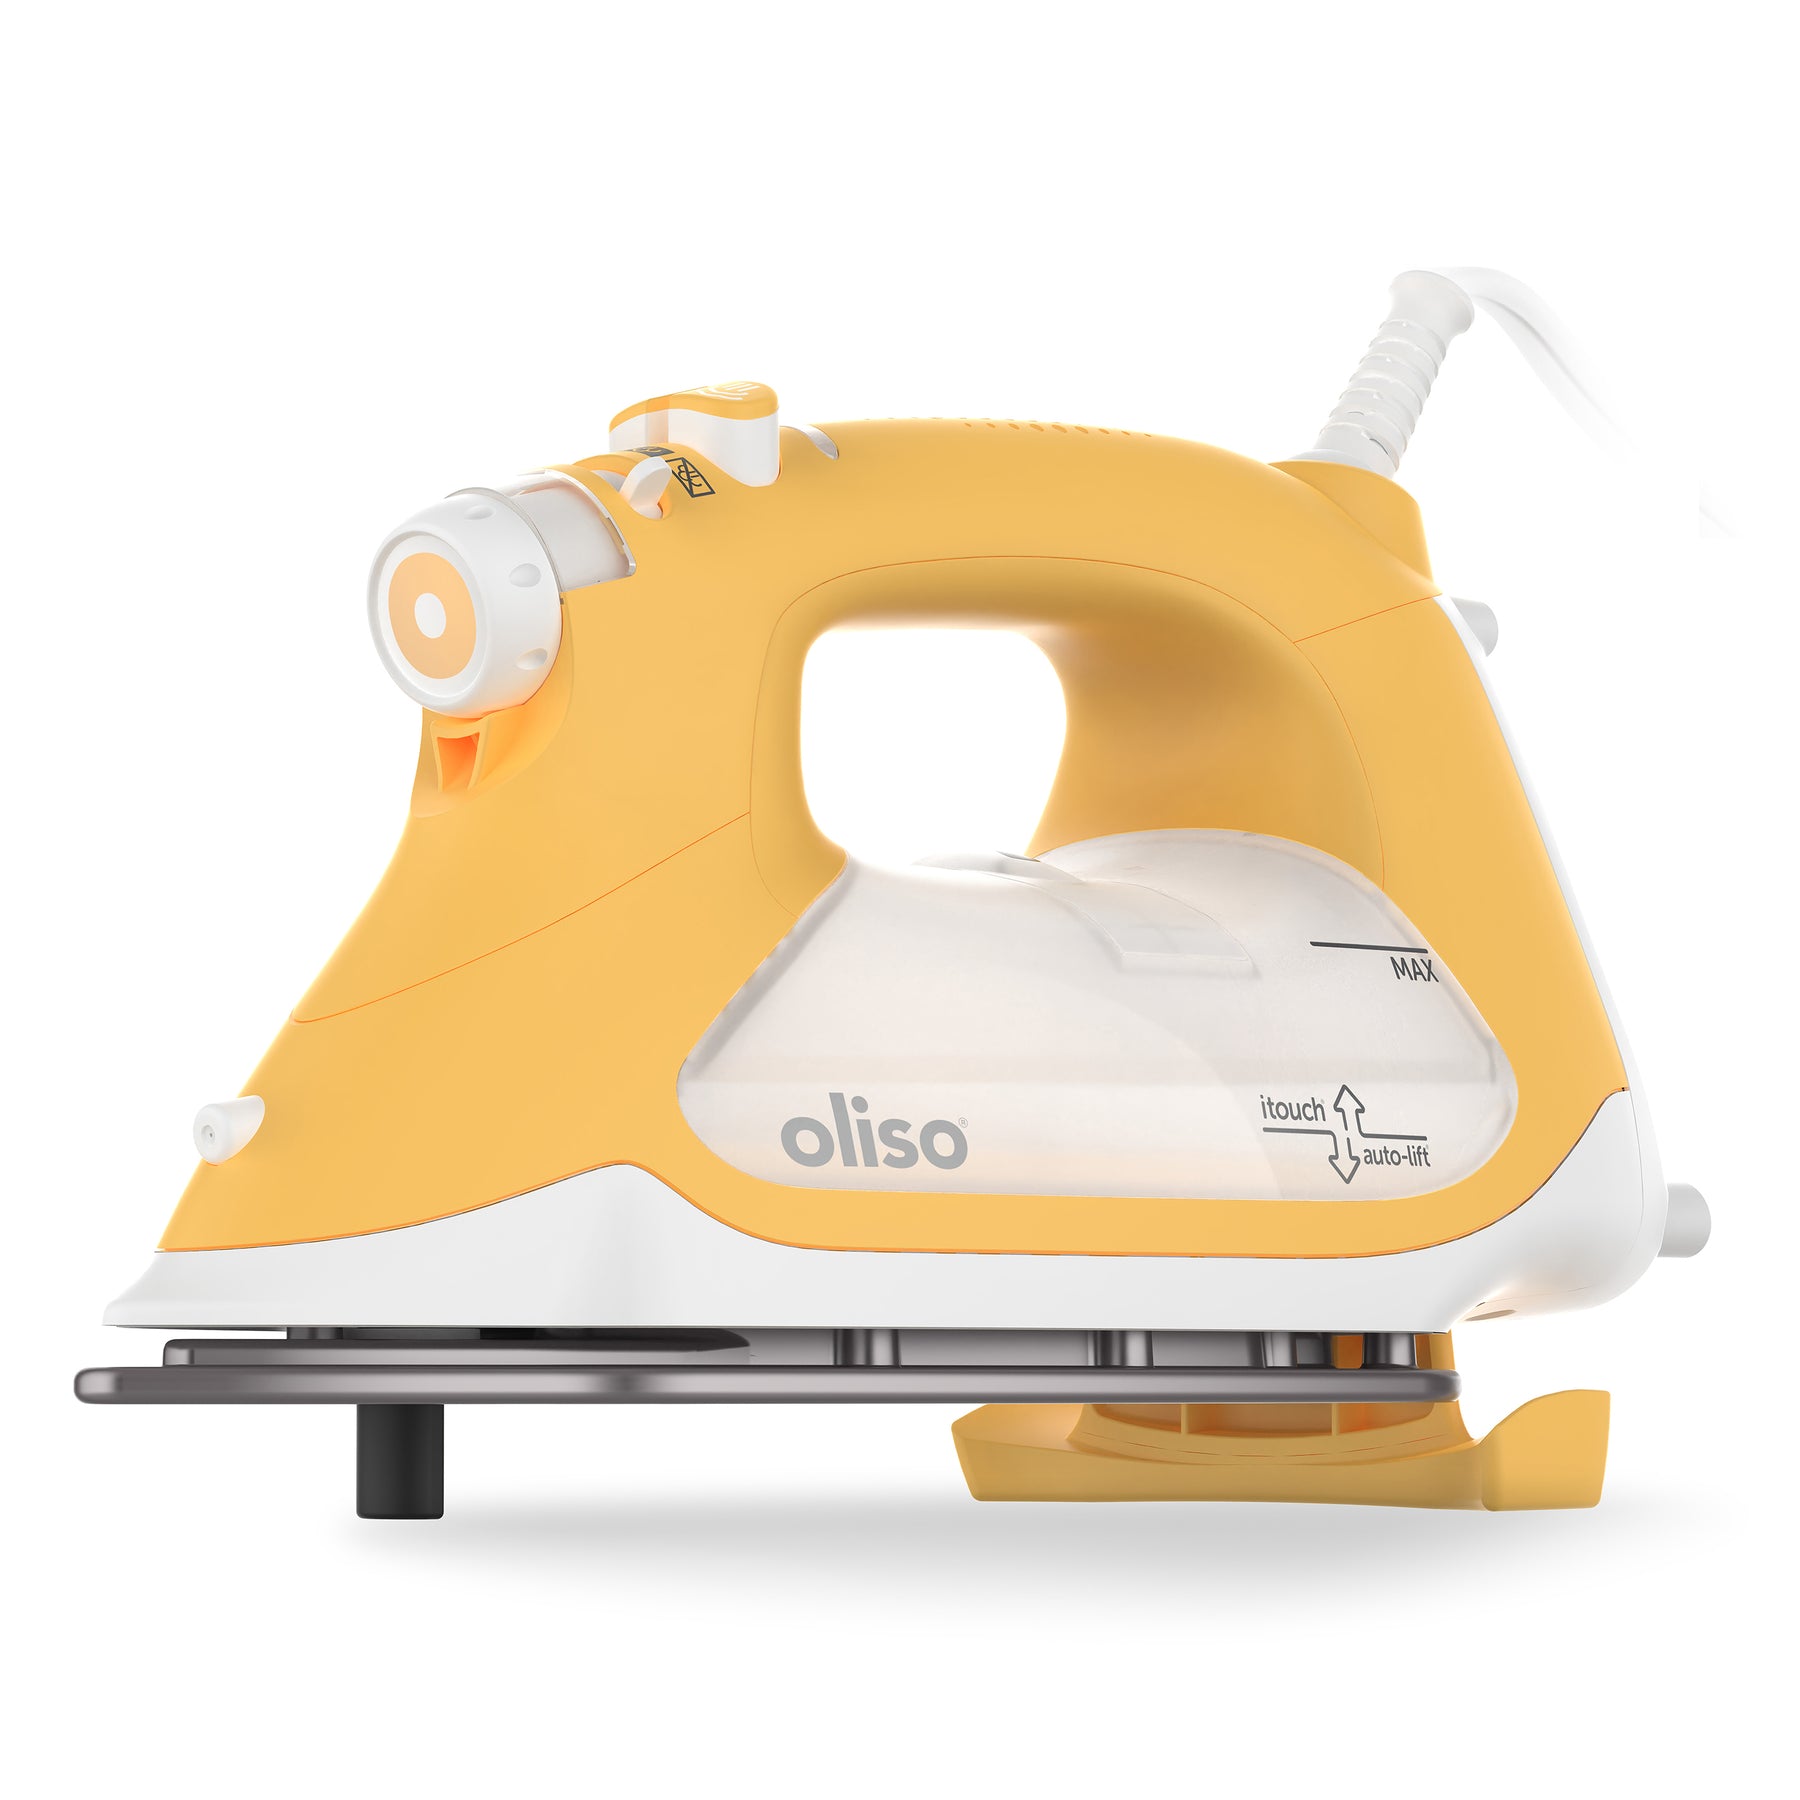 A review of the OLISO-TG1600 SMART IRON